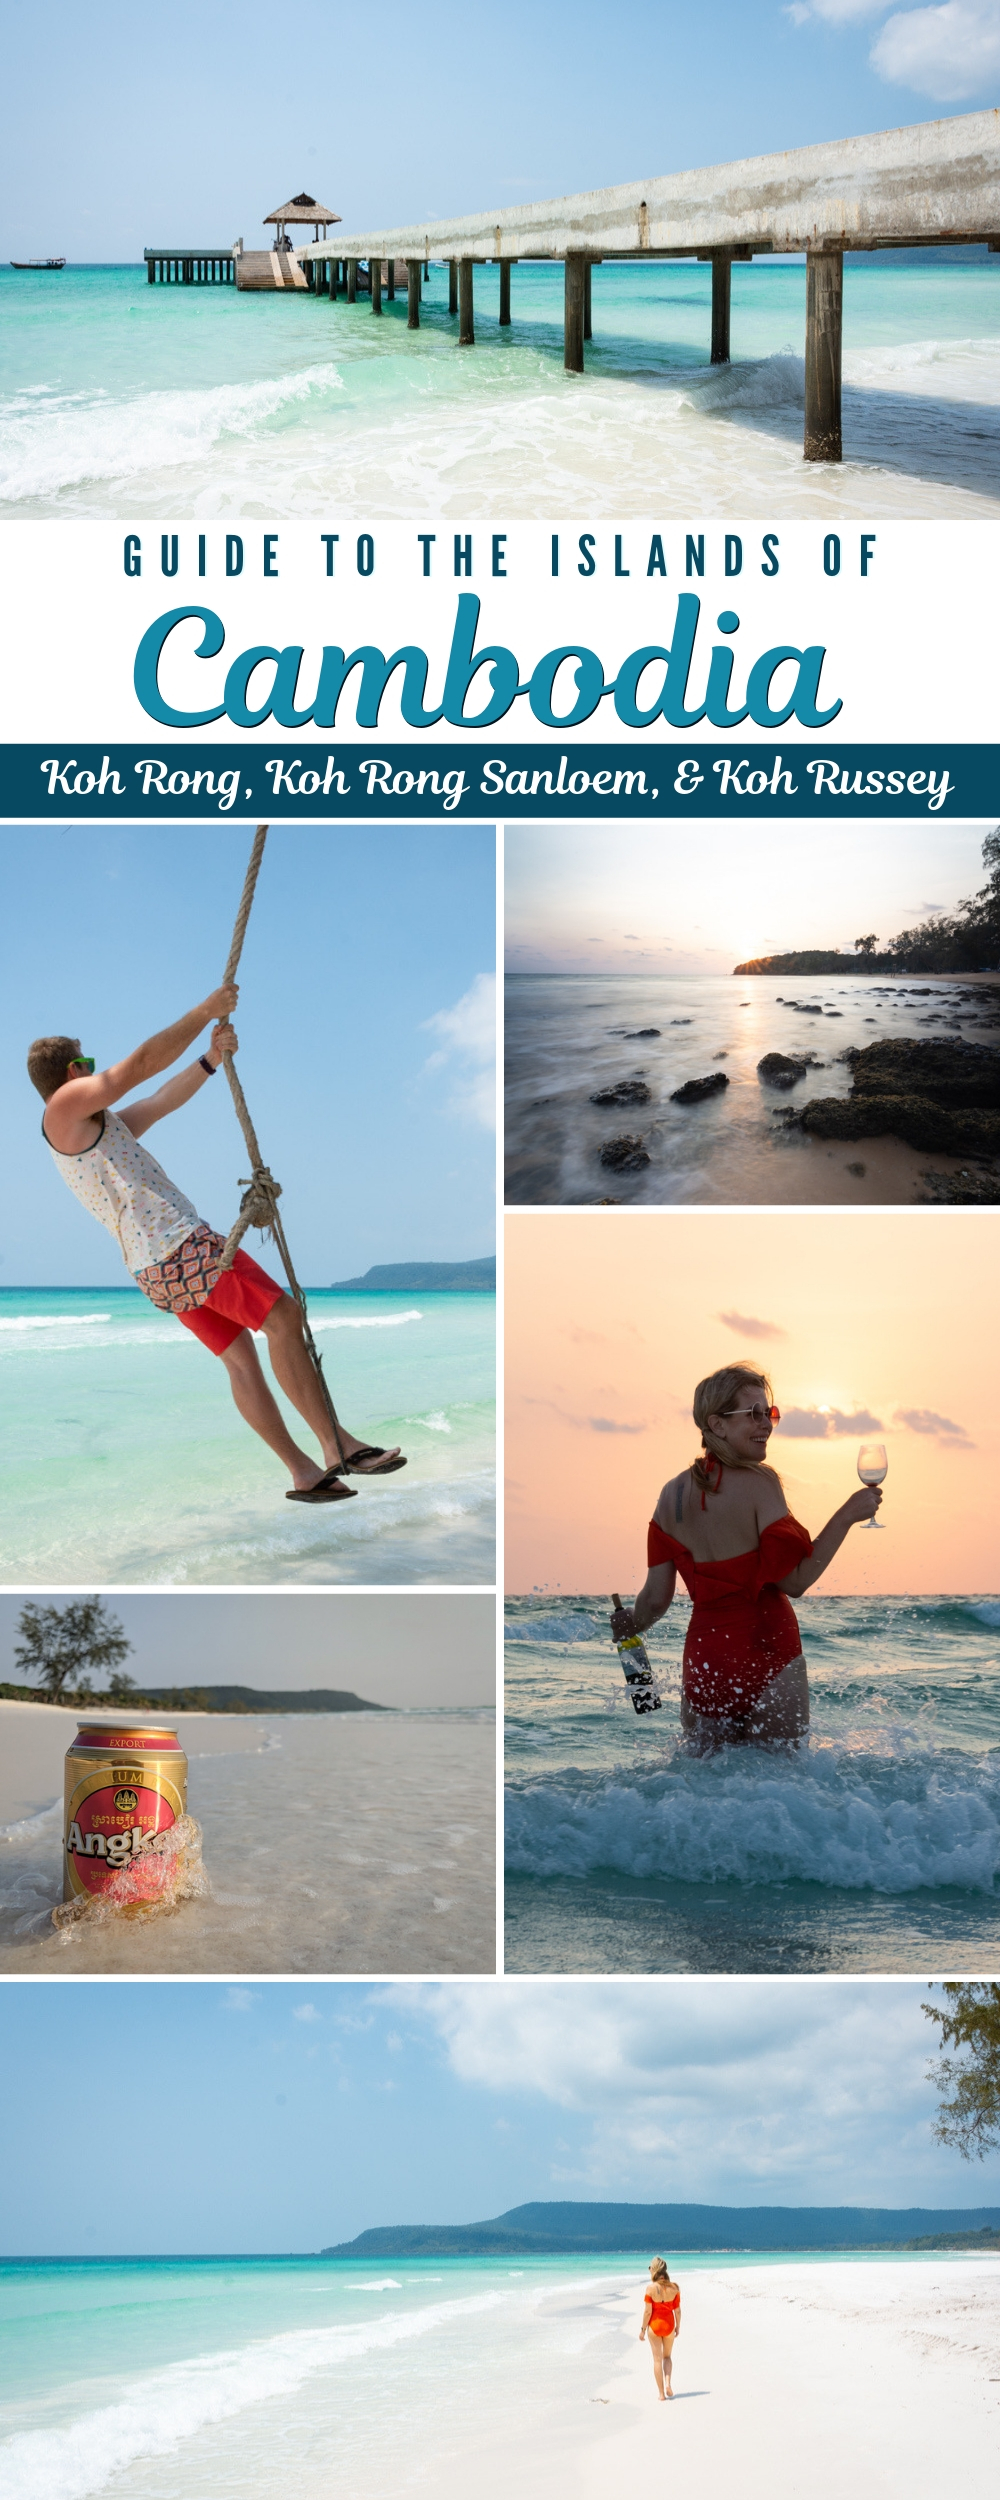 Best Islands and Beachs in Cambodia: Koh Rong, Kh Rong Sanleom, & Koh Russey